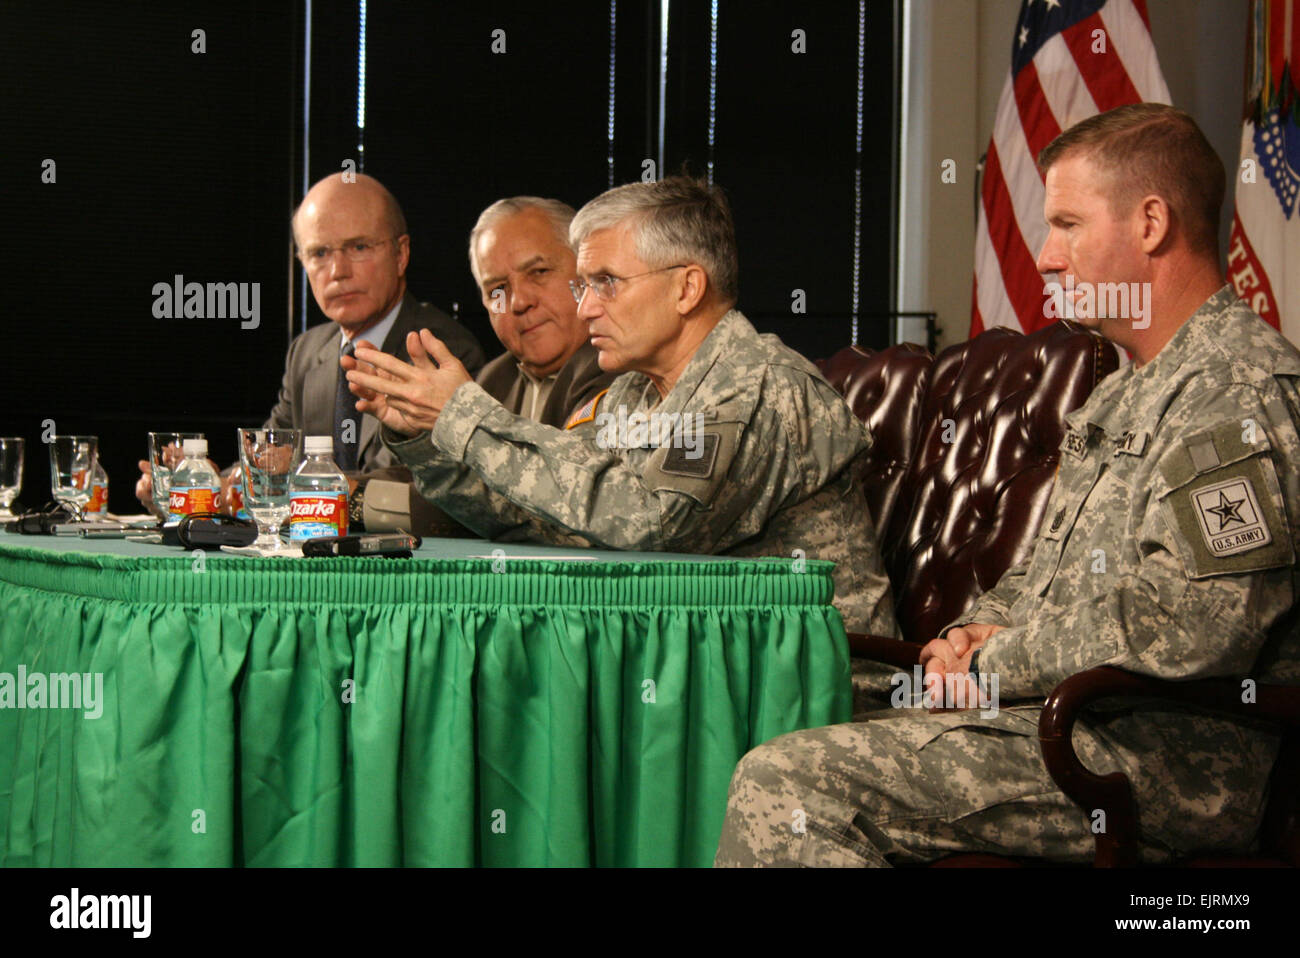 From left to right Secretary of the Army Pete Geren, U.S. Congressman Silvestre Reyes, Chief of Staff of the Army Gen. George W. Casey Jr., and Sergeant Major of the Army Kenneth O. Preston announce the Year of the Noncommissioned Officer during a press conference held Jan. 5 at the Sergeants Major Academy at Fort Bliss, Texas. Stock Photo